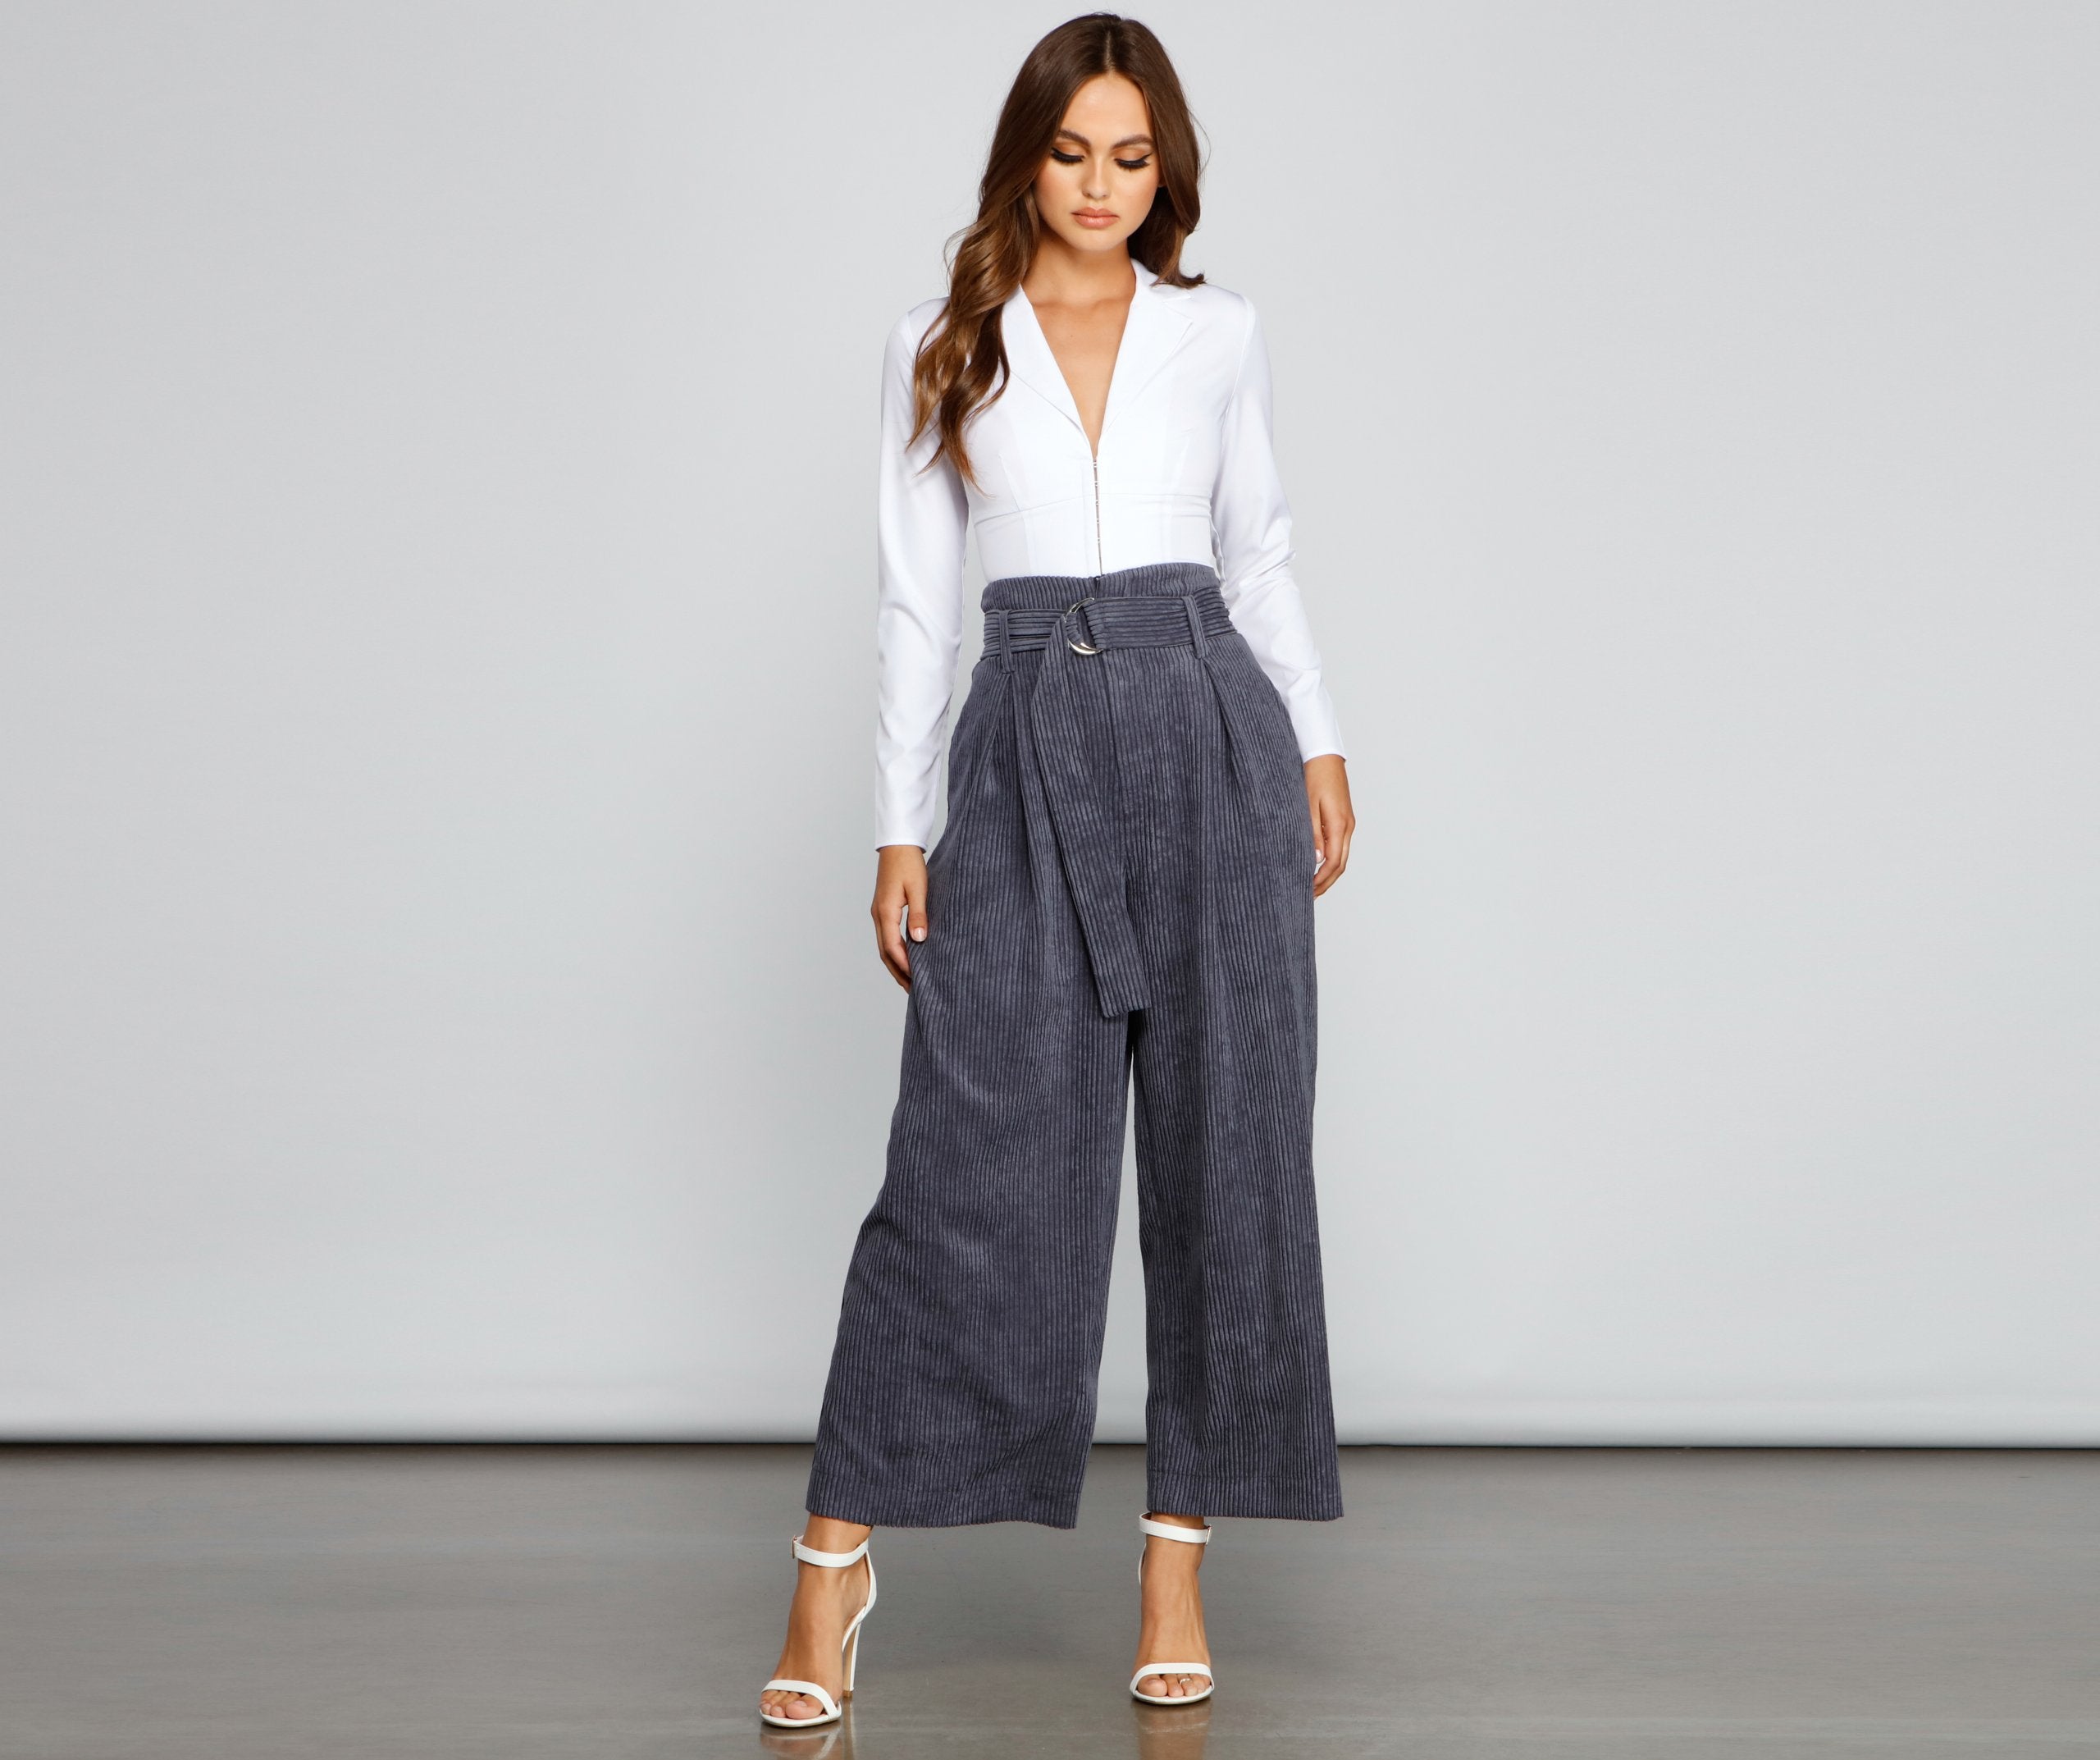 High Waist Flared Corduroy Pants - Lady Occasions